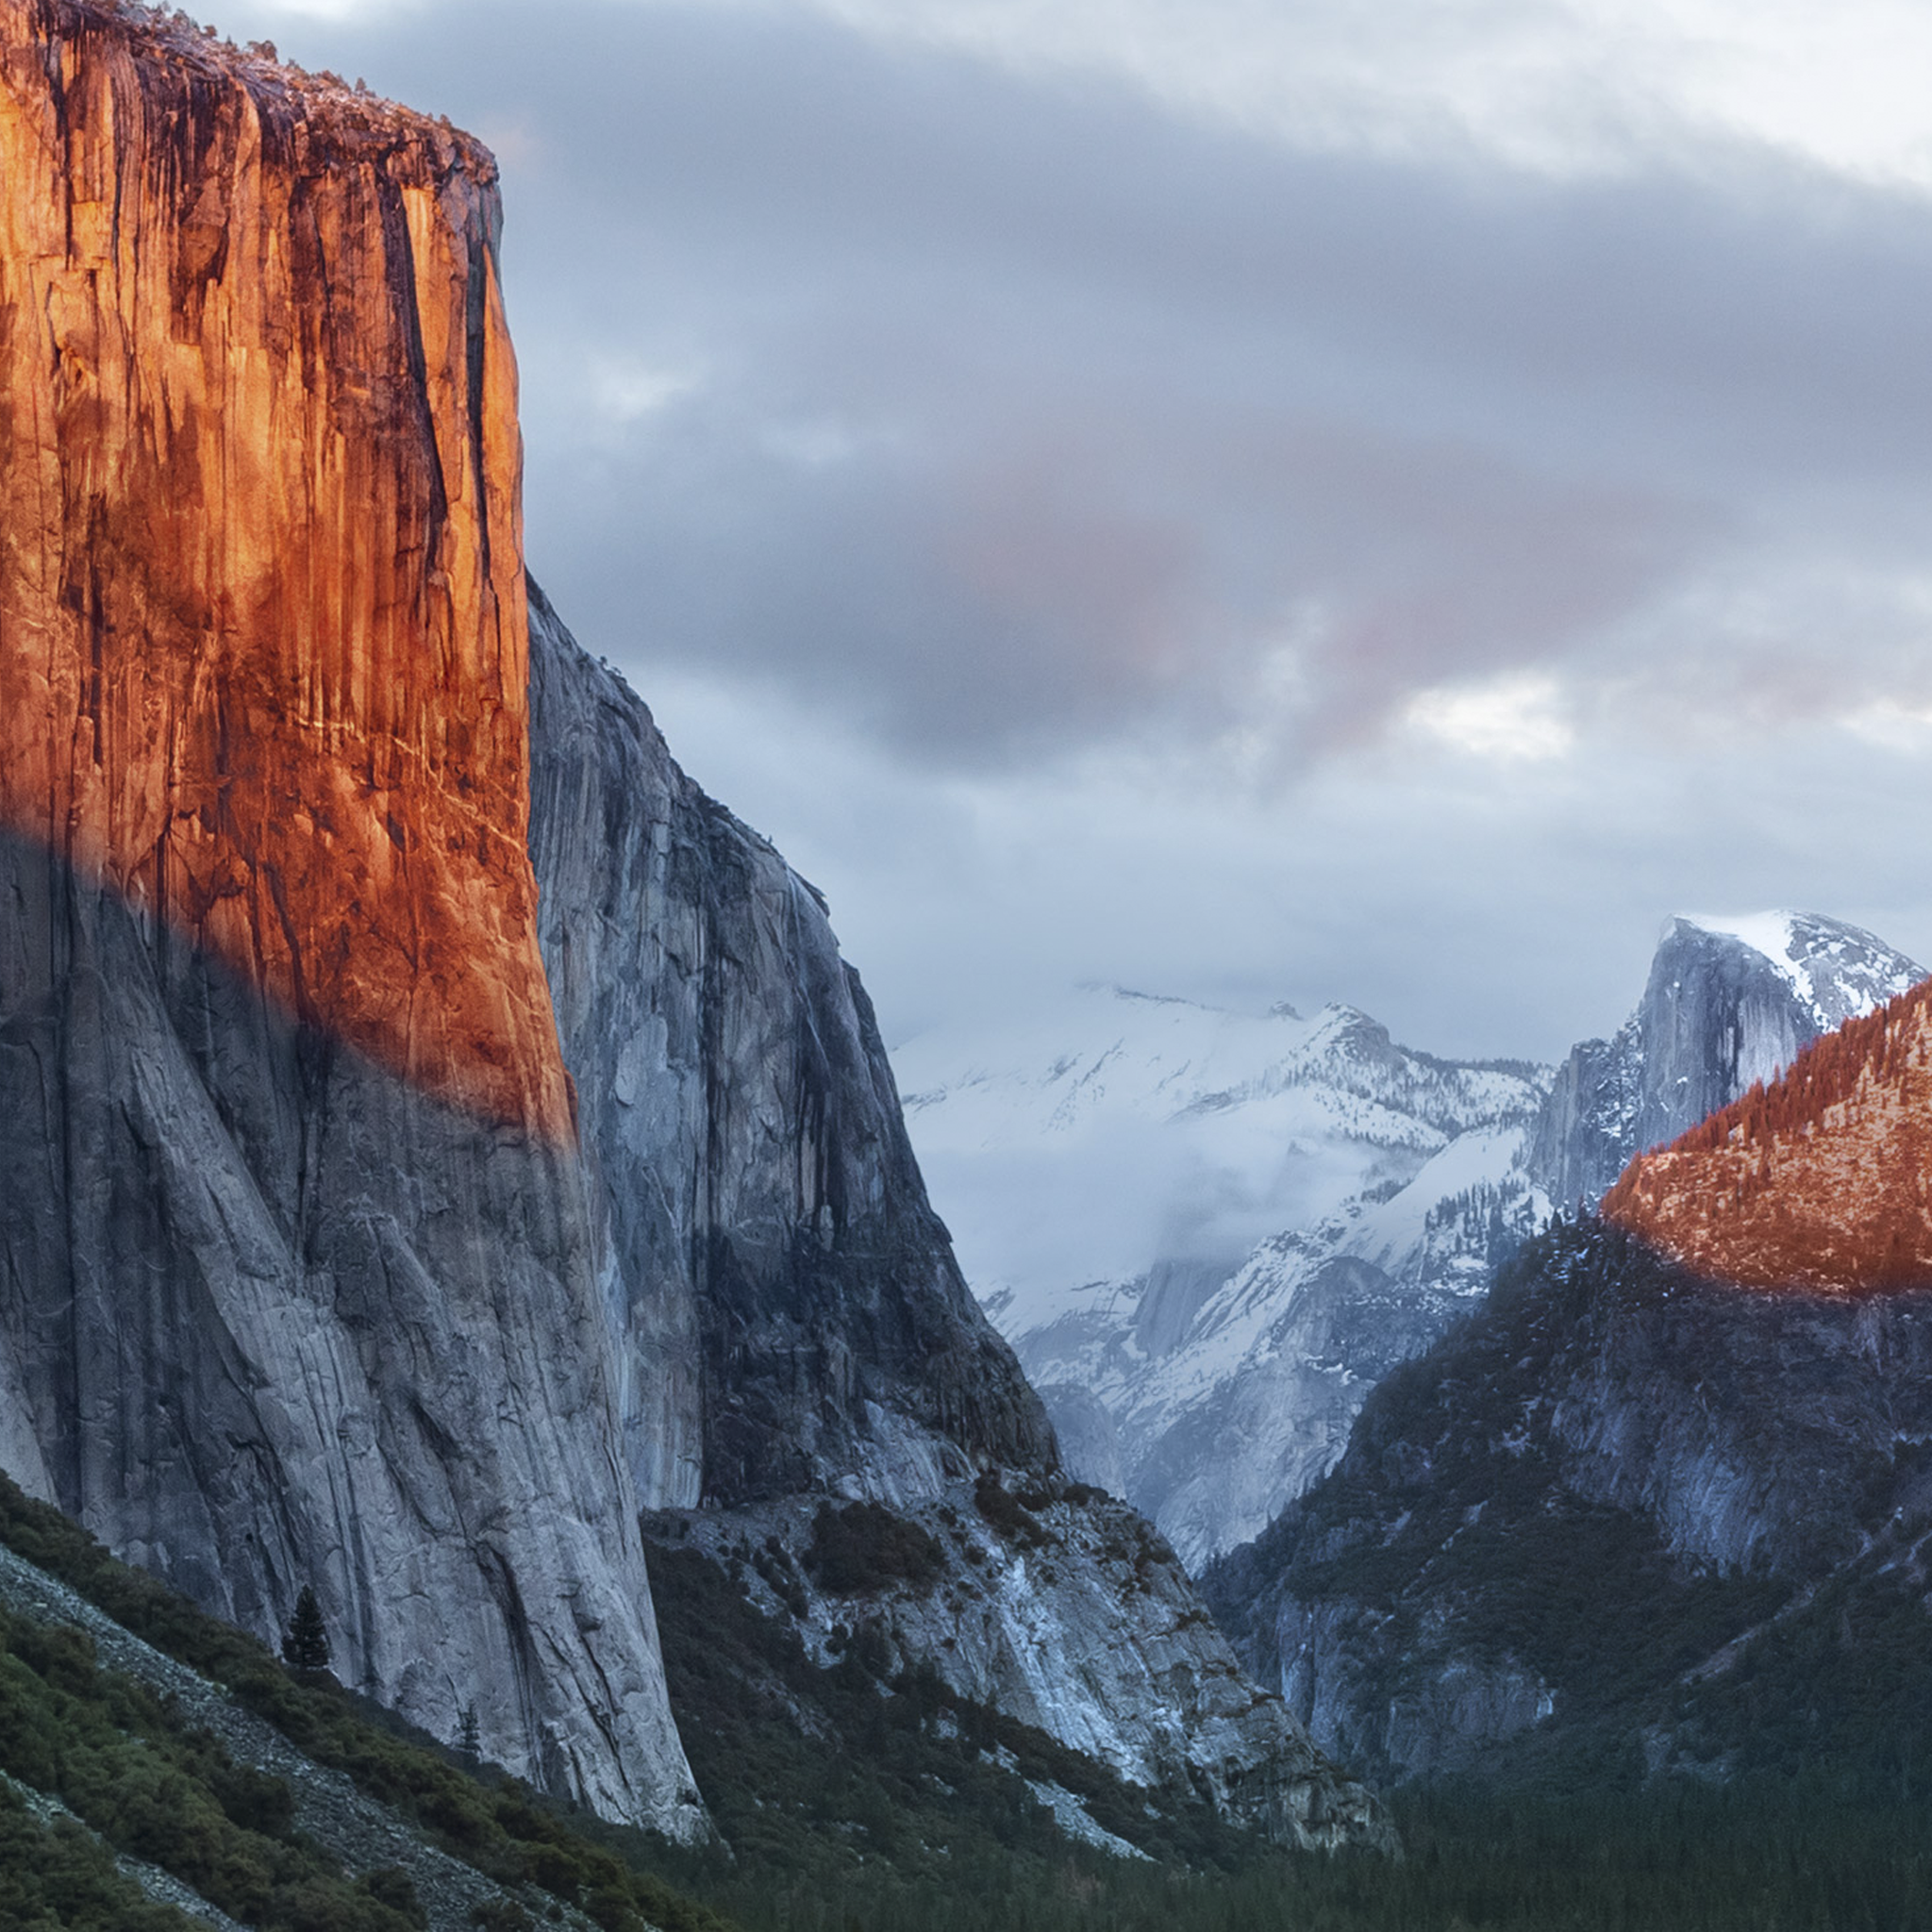 How to create a recovery disk for el capitan drive